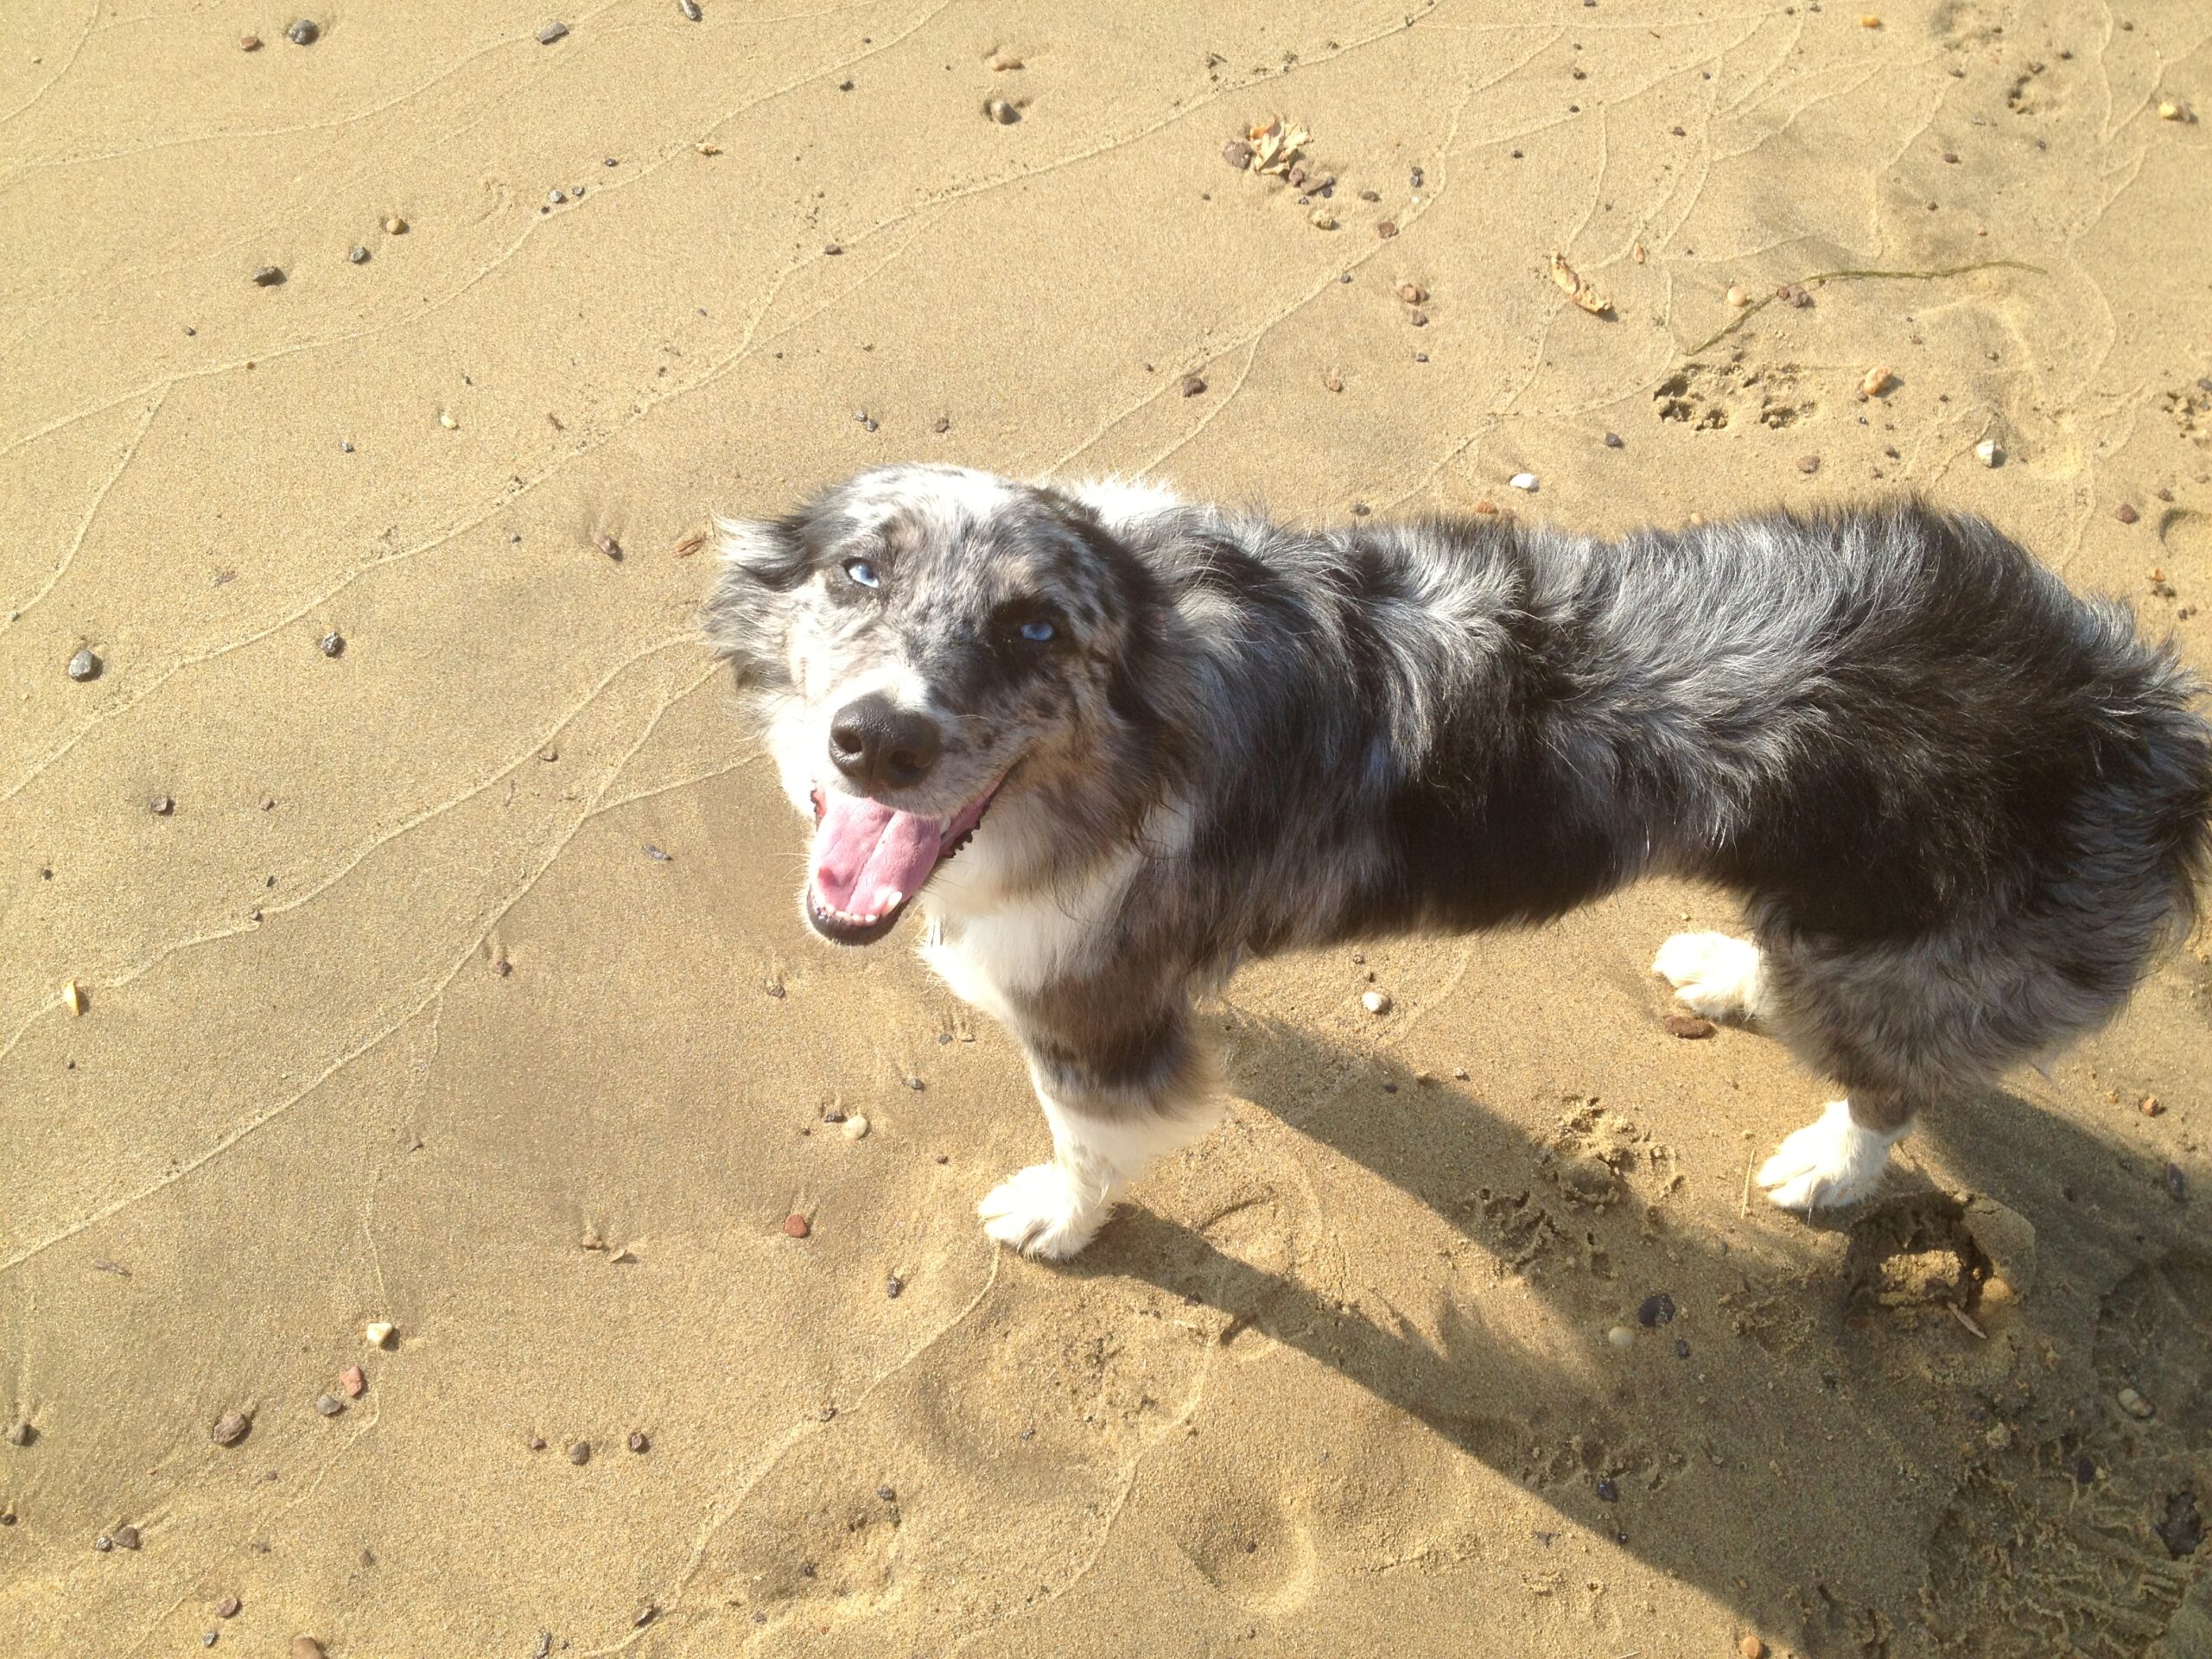 Stella loving her day at the beach! :)